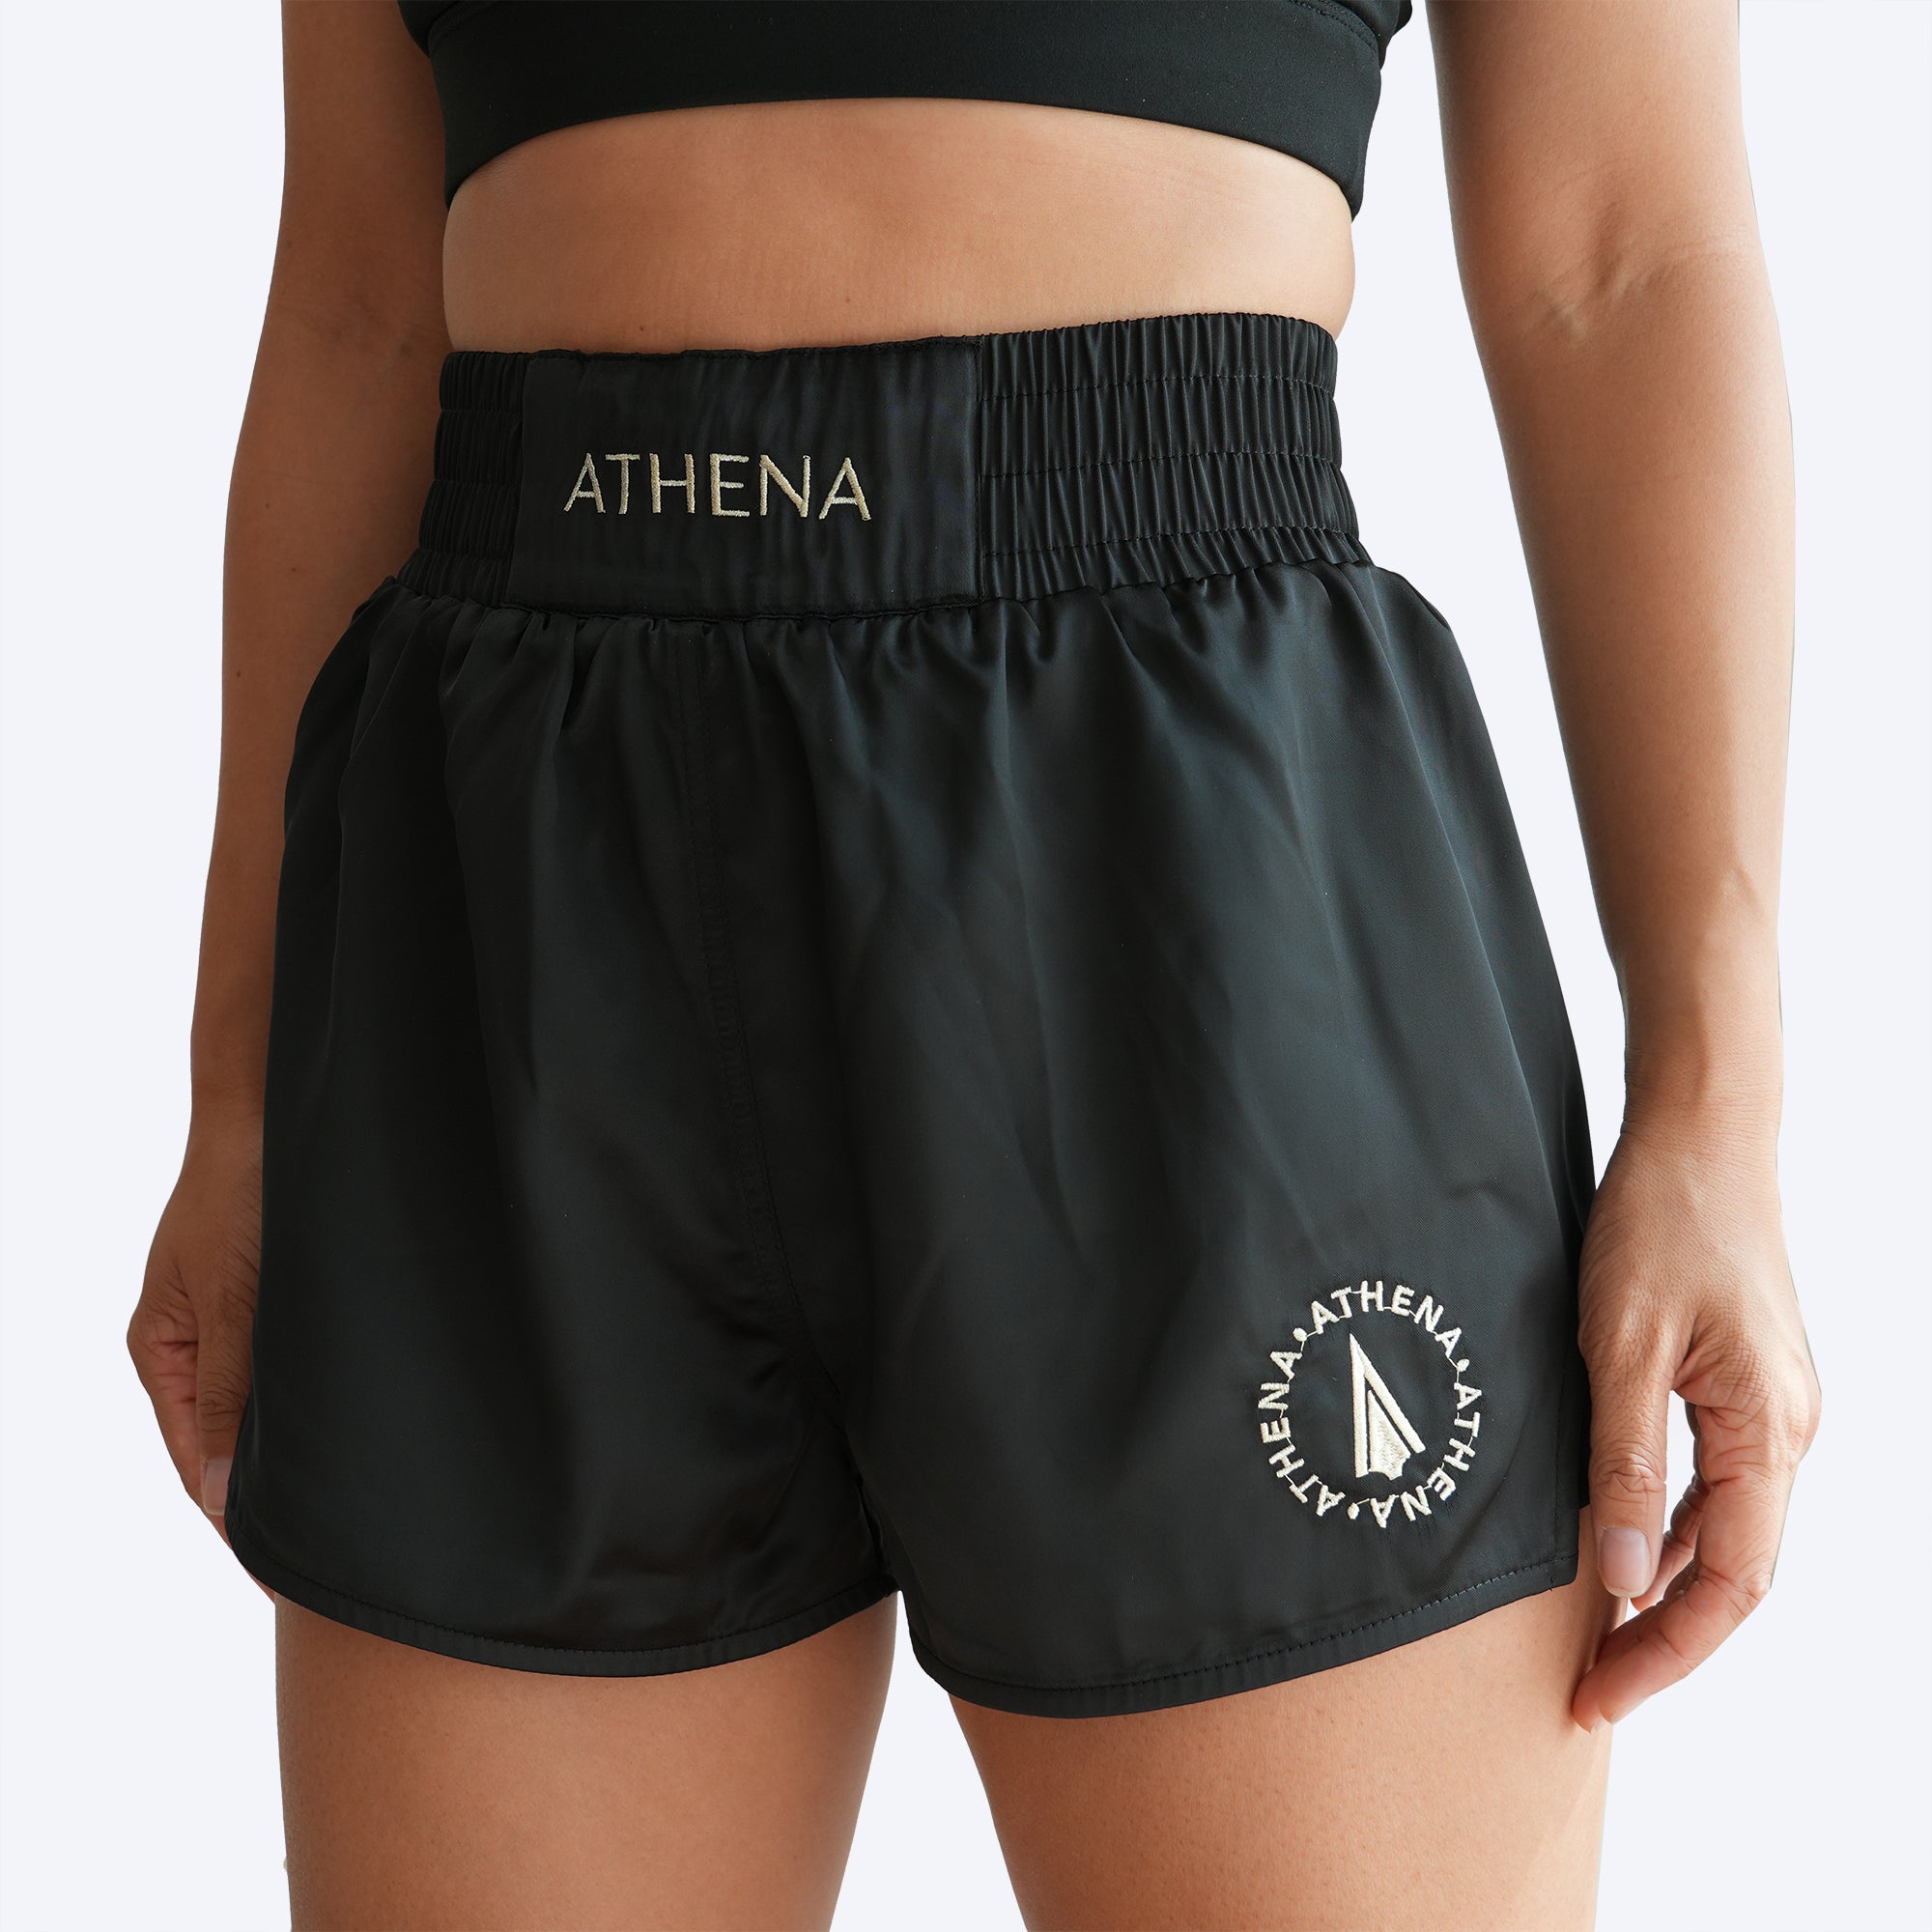 Athena Fightwear Enyo women's muay thai shorts black gold with wide hips and built in safety shorts with anti camel toe anti ride up and pockets